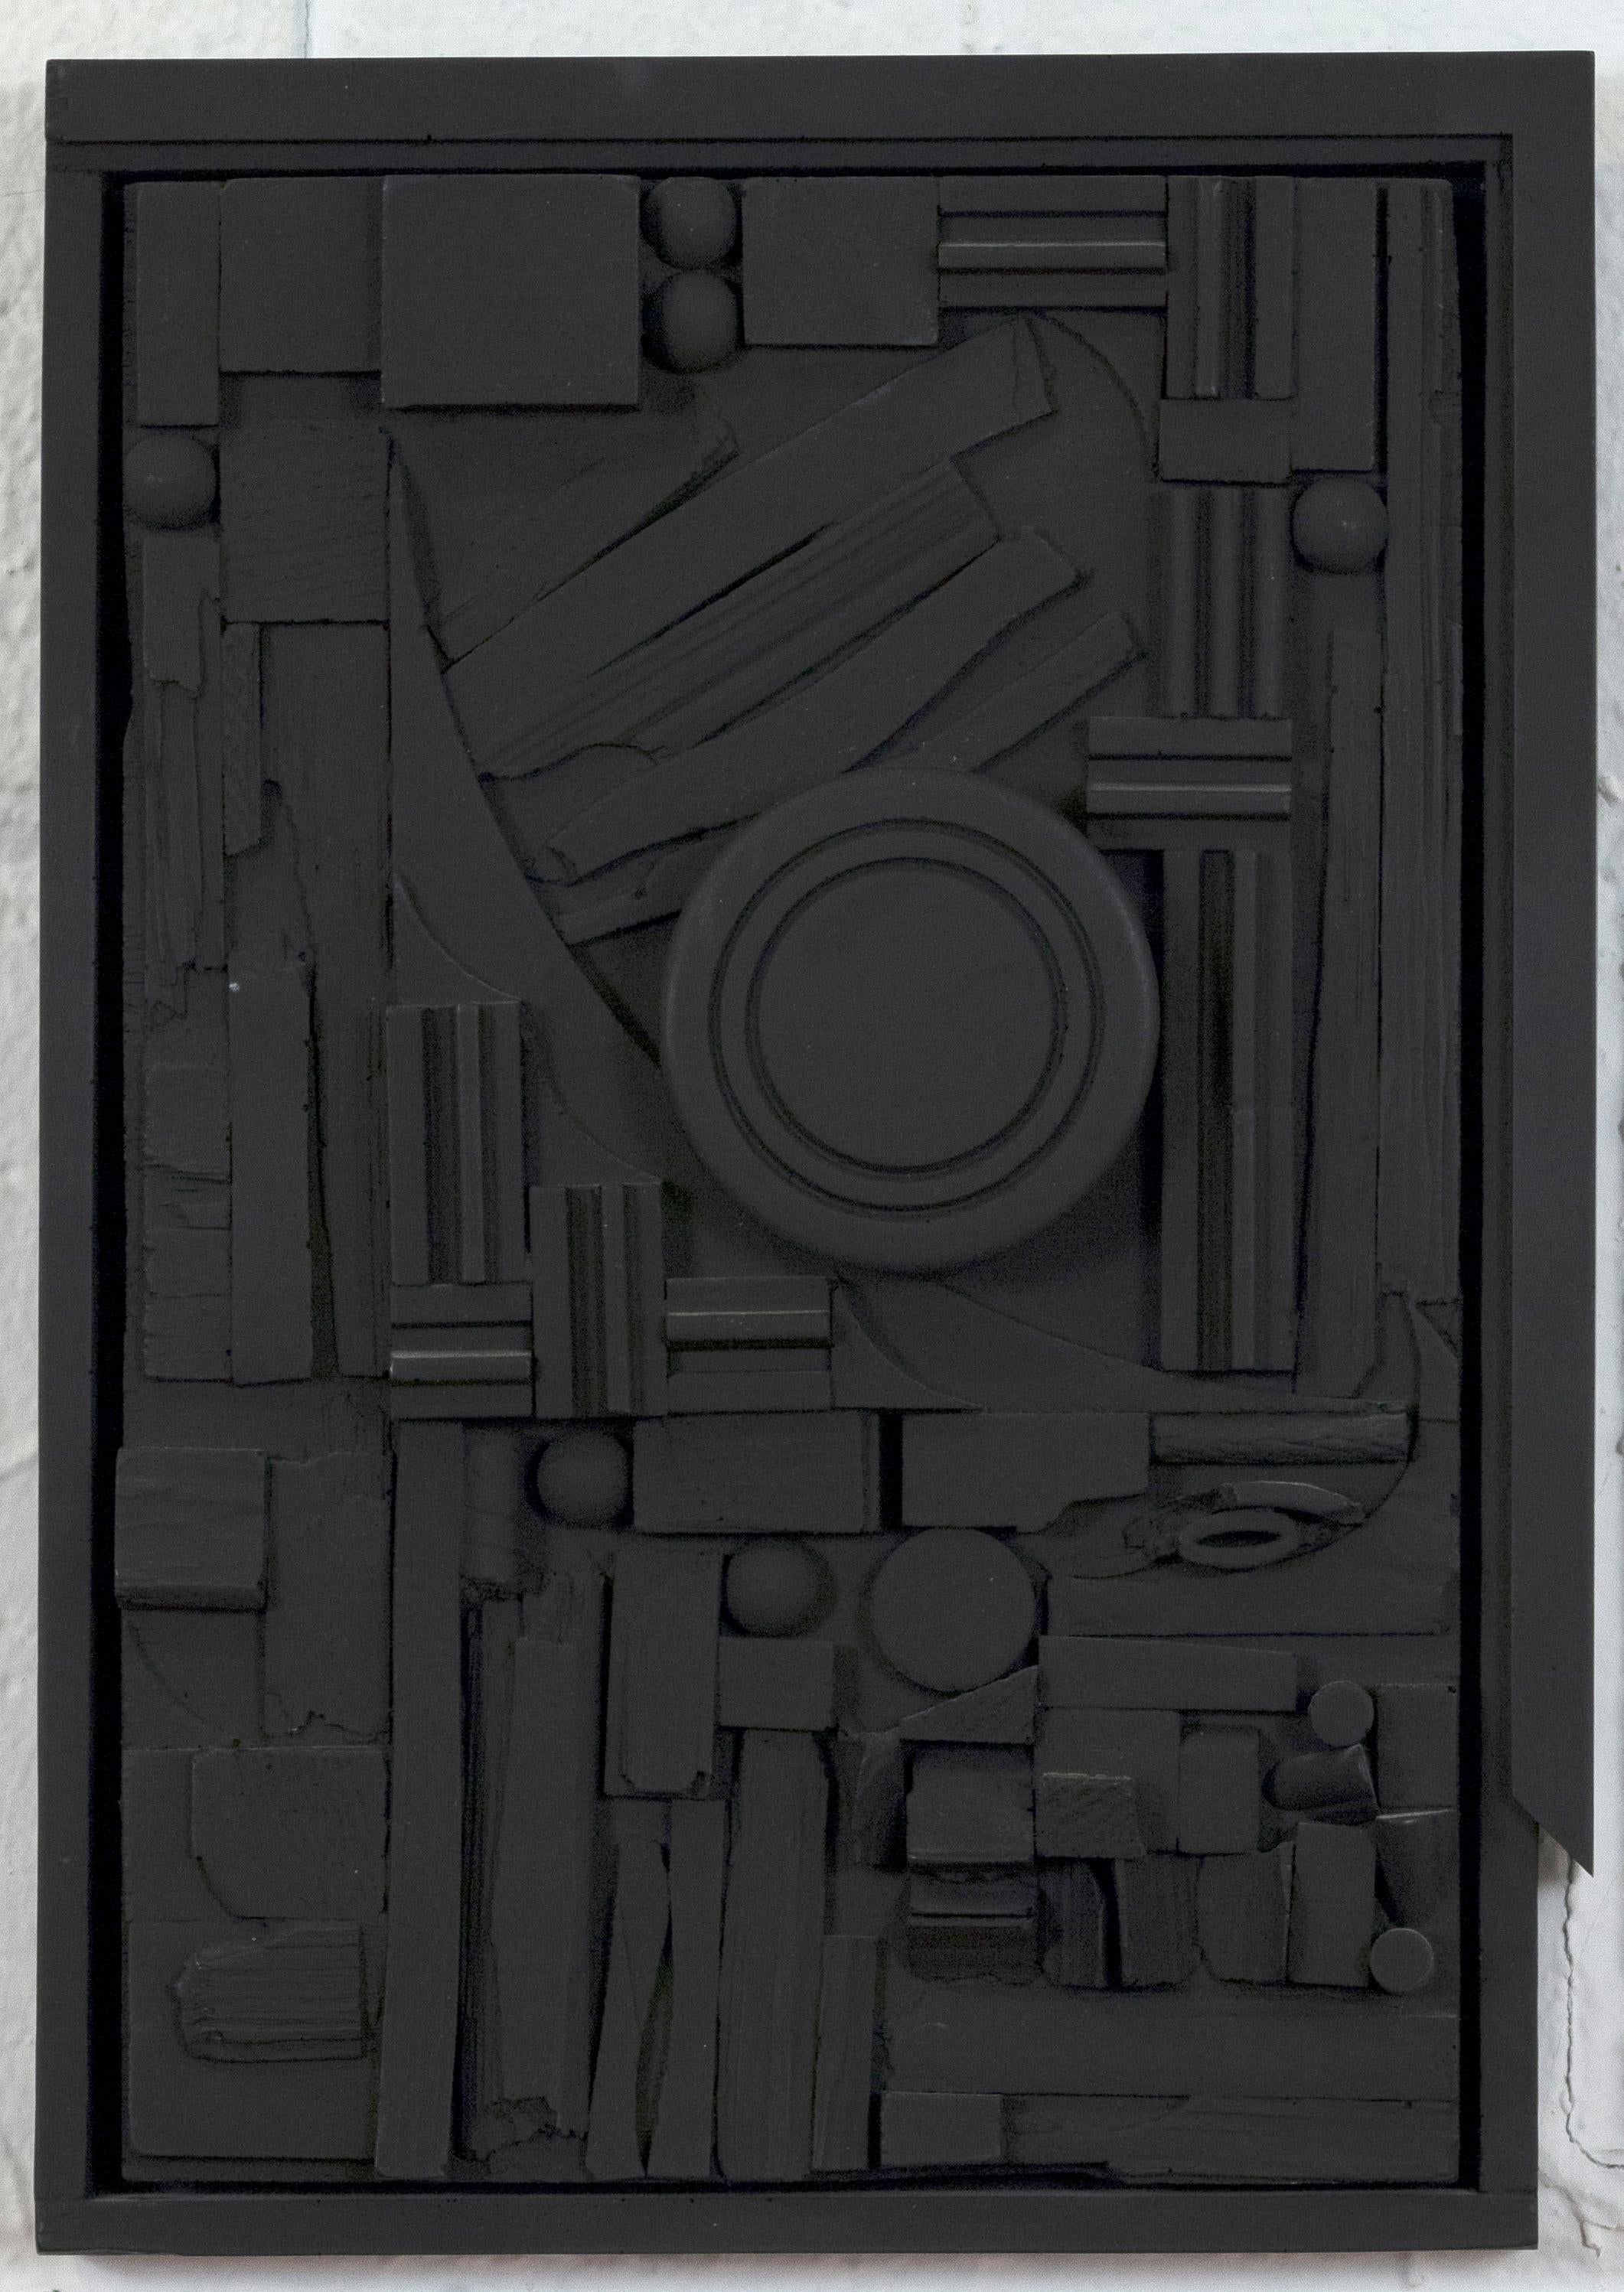 Caviar20 is excited to be offering this fantastic sculpture by the inimitable Louise Nevelson - one of the most revered and unique sculptors of the 20th century.

Her work has had an undeniable influence on a host of significant artists including